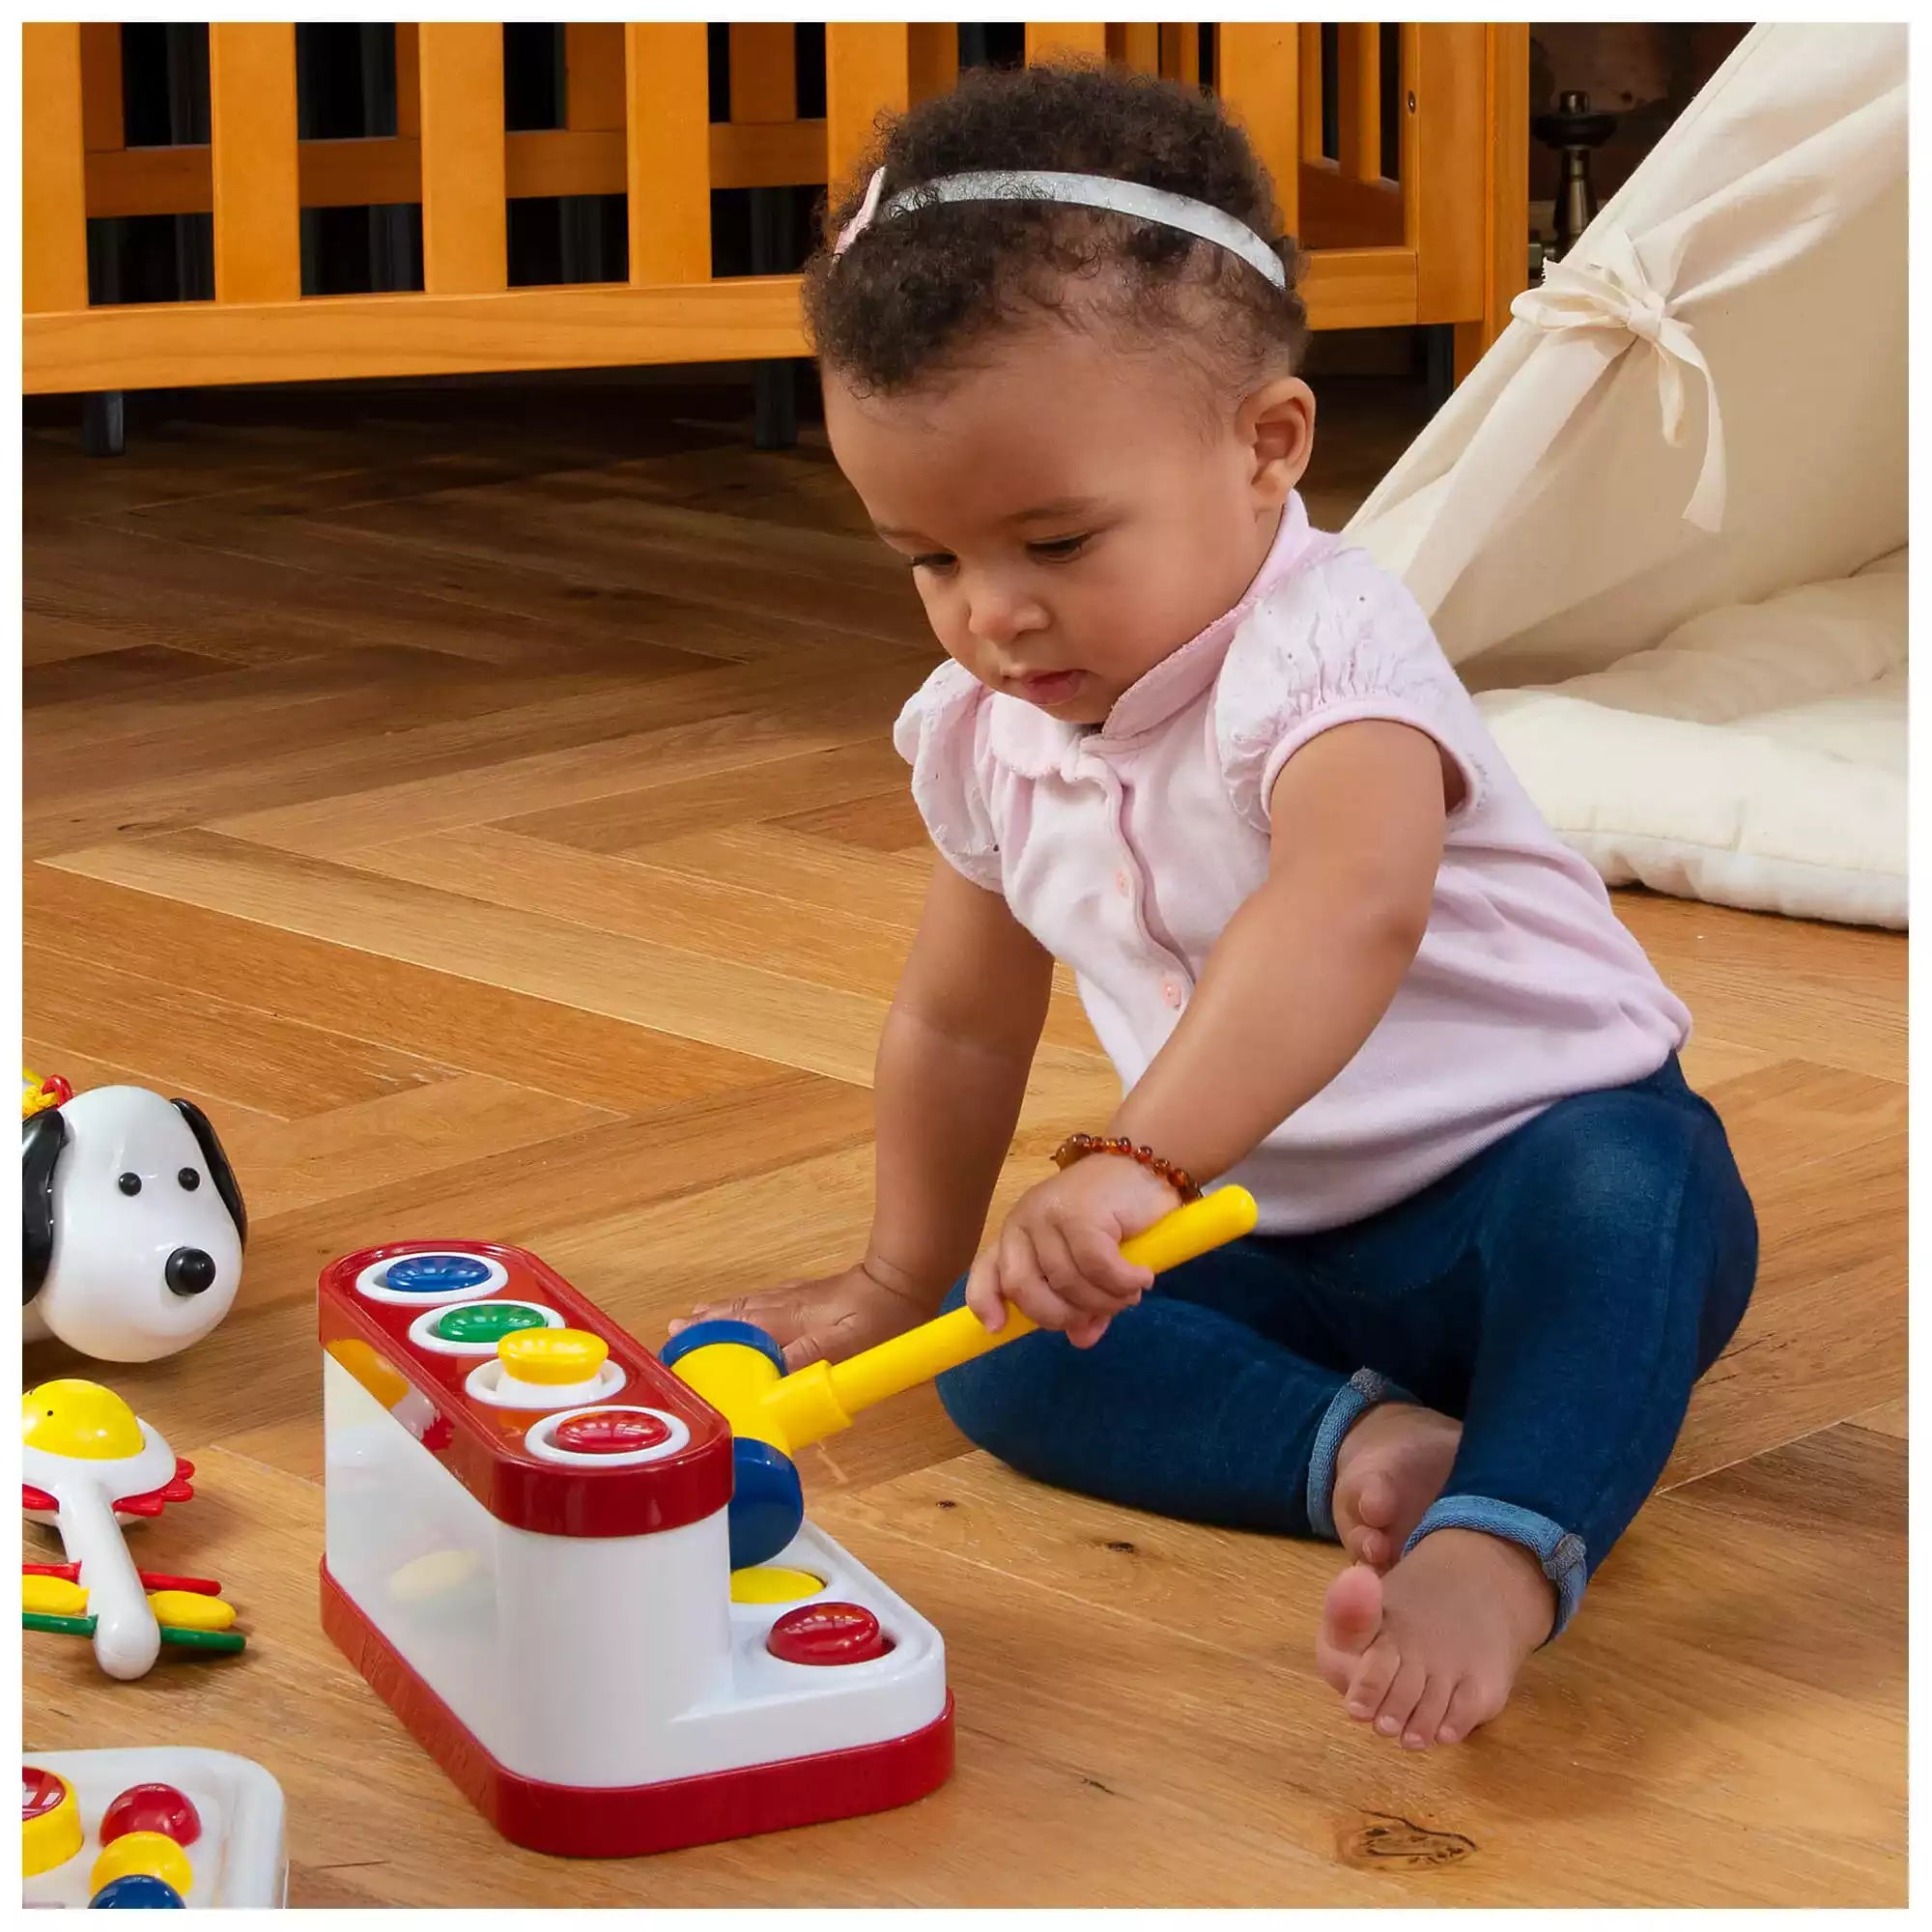 pop up toys for toddlers - pop up pals - shop galt toys at the toy room